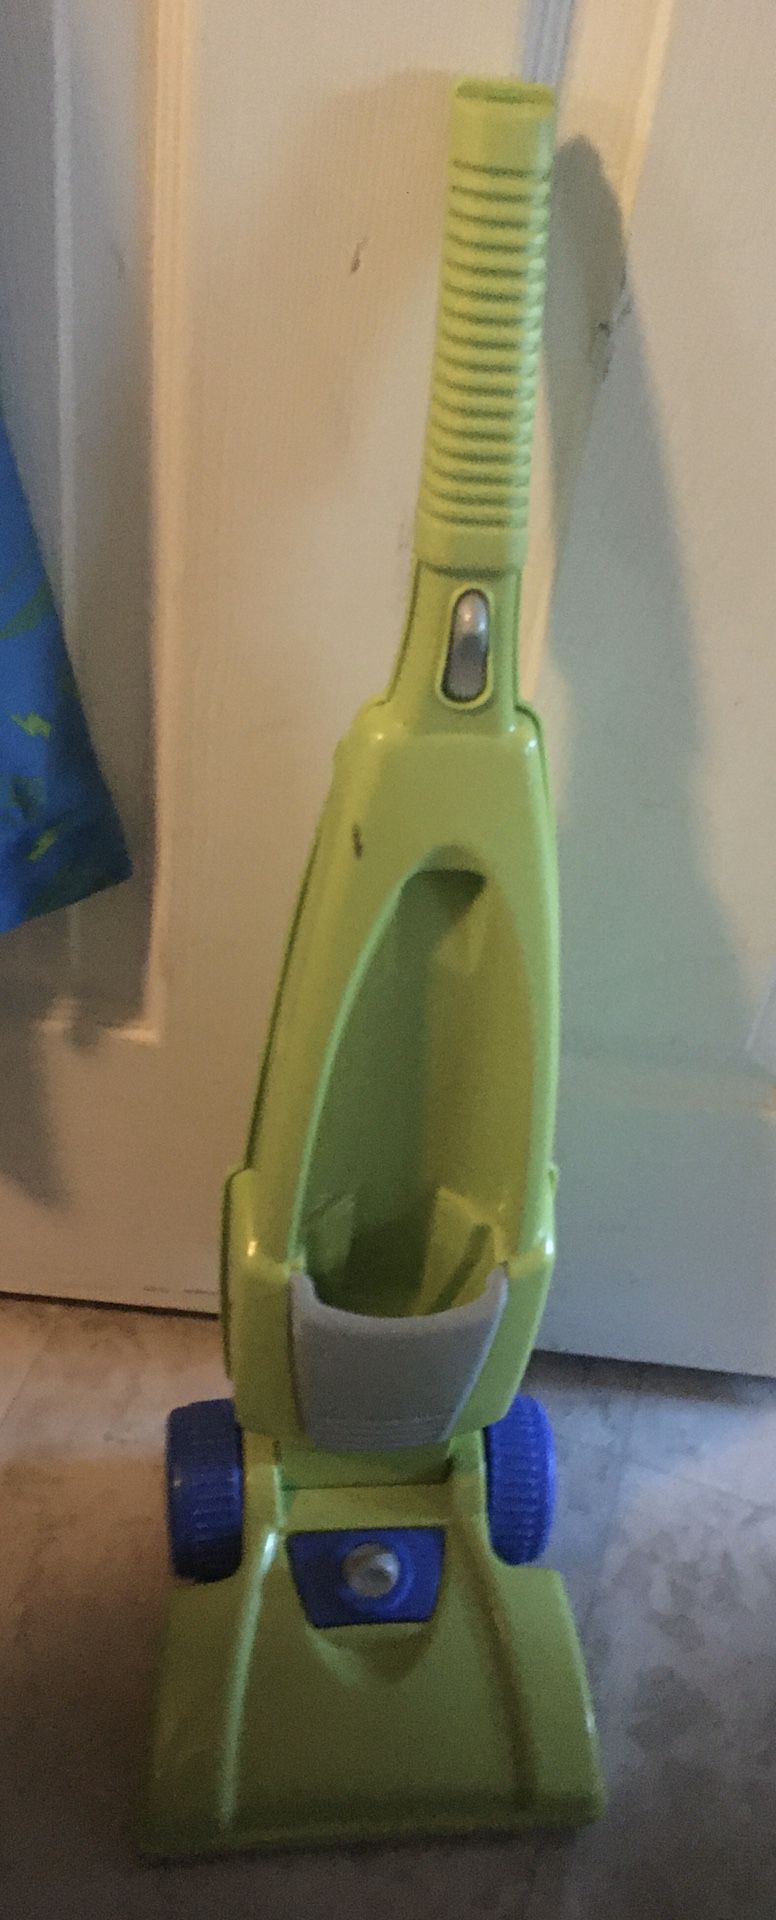 Green & Blue Toy Vacuum Cleaner